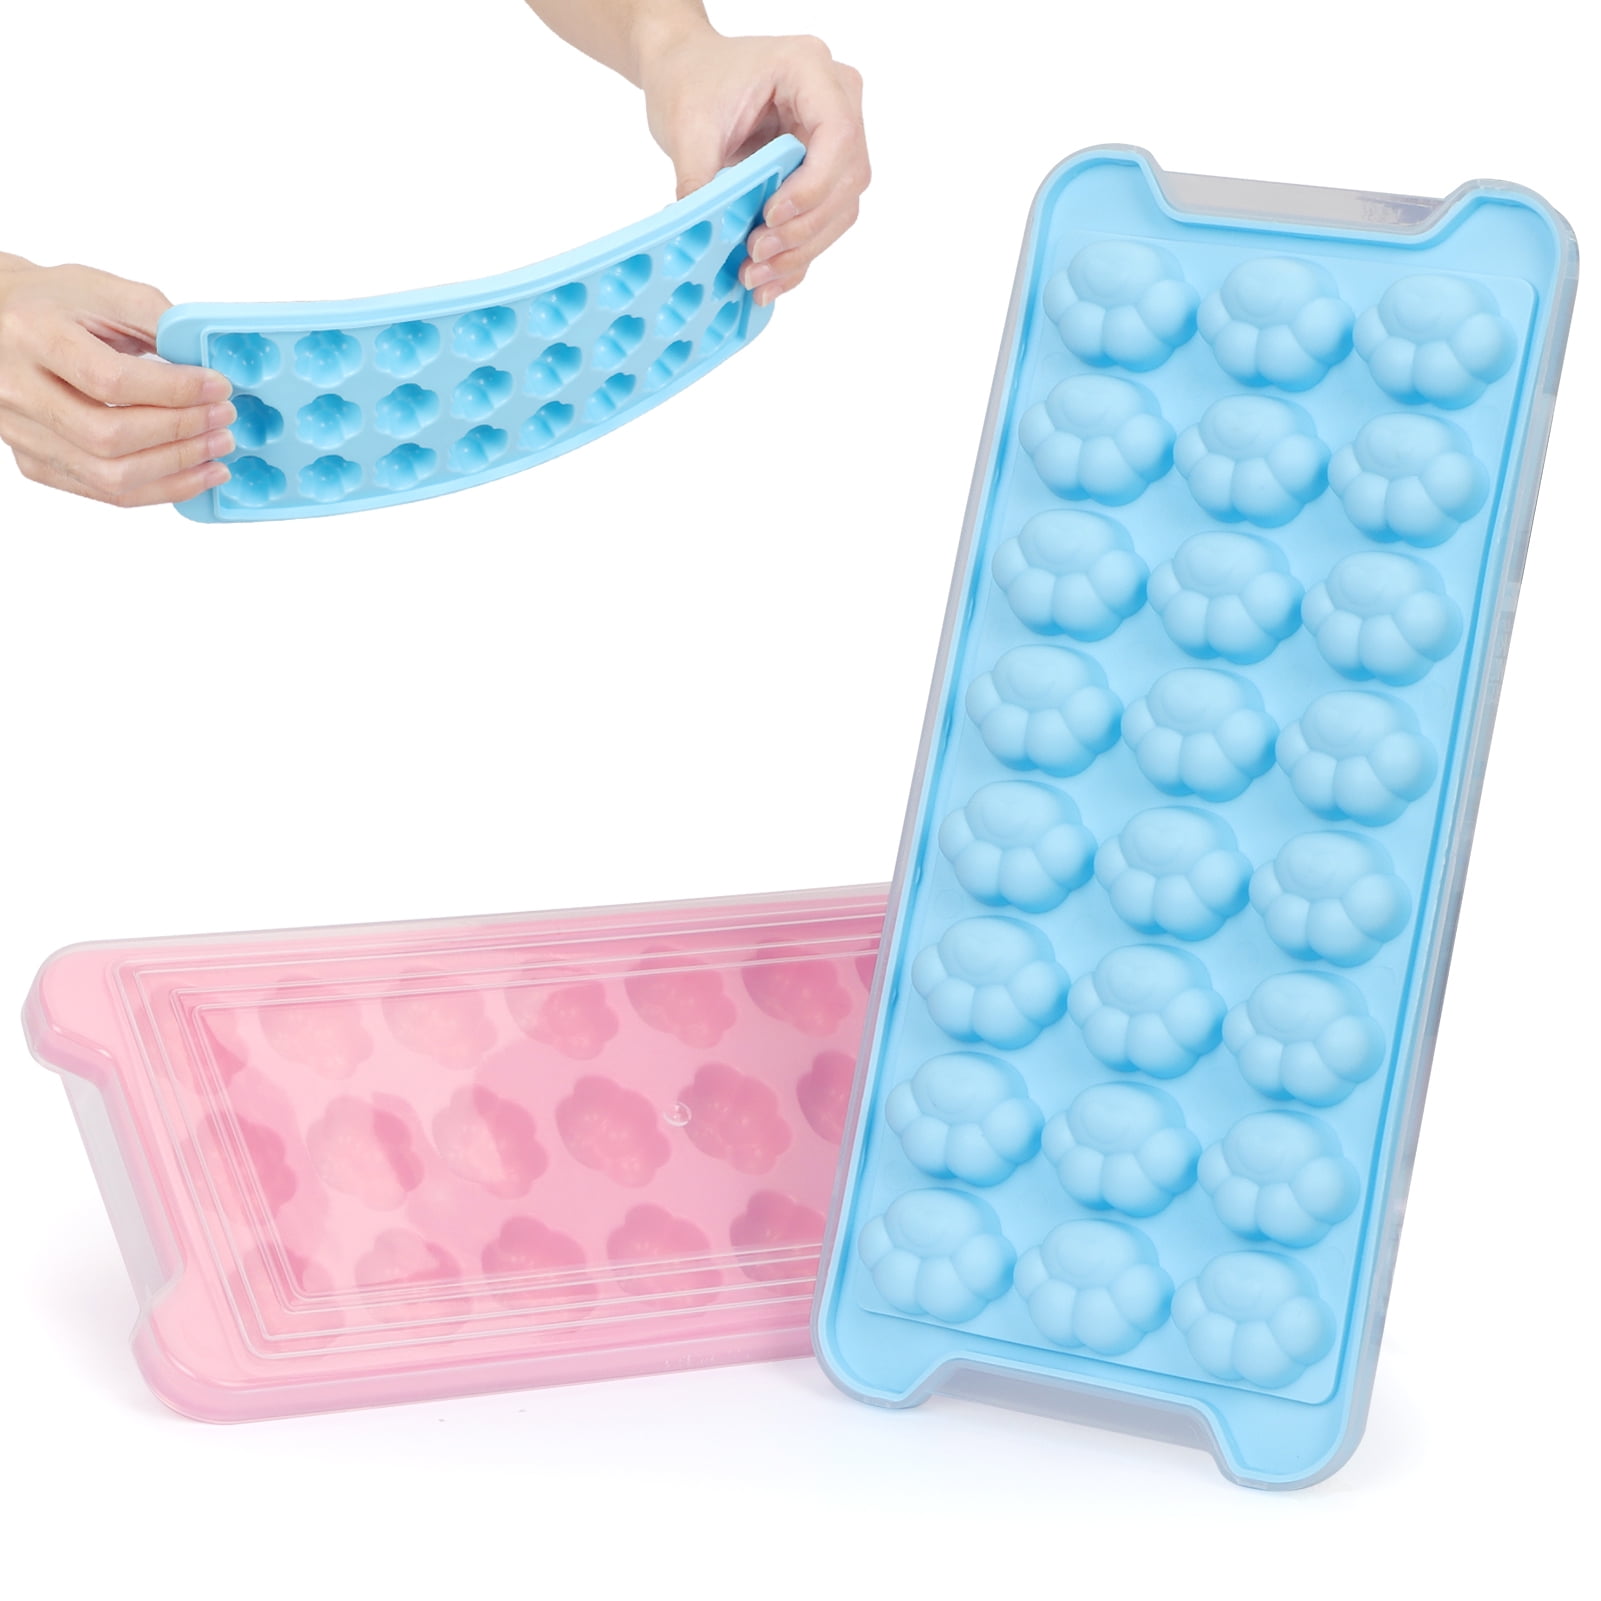 What On Earth Cat Ice Cube Tray - BPA-Free Silicone Kitty Shaped